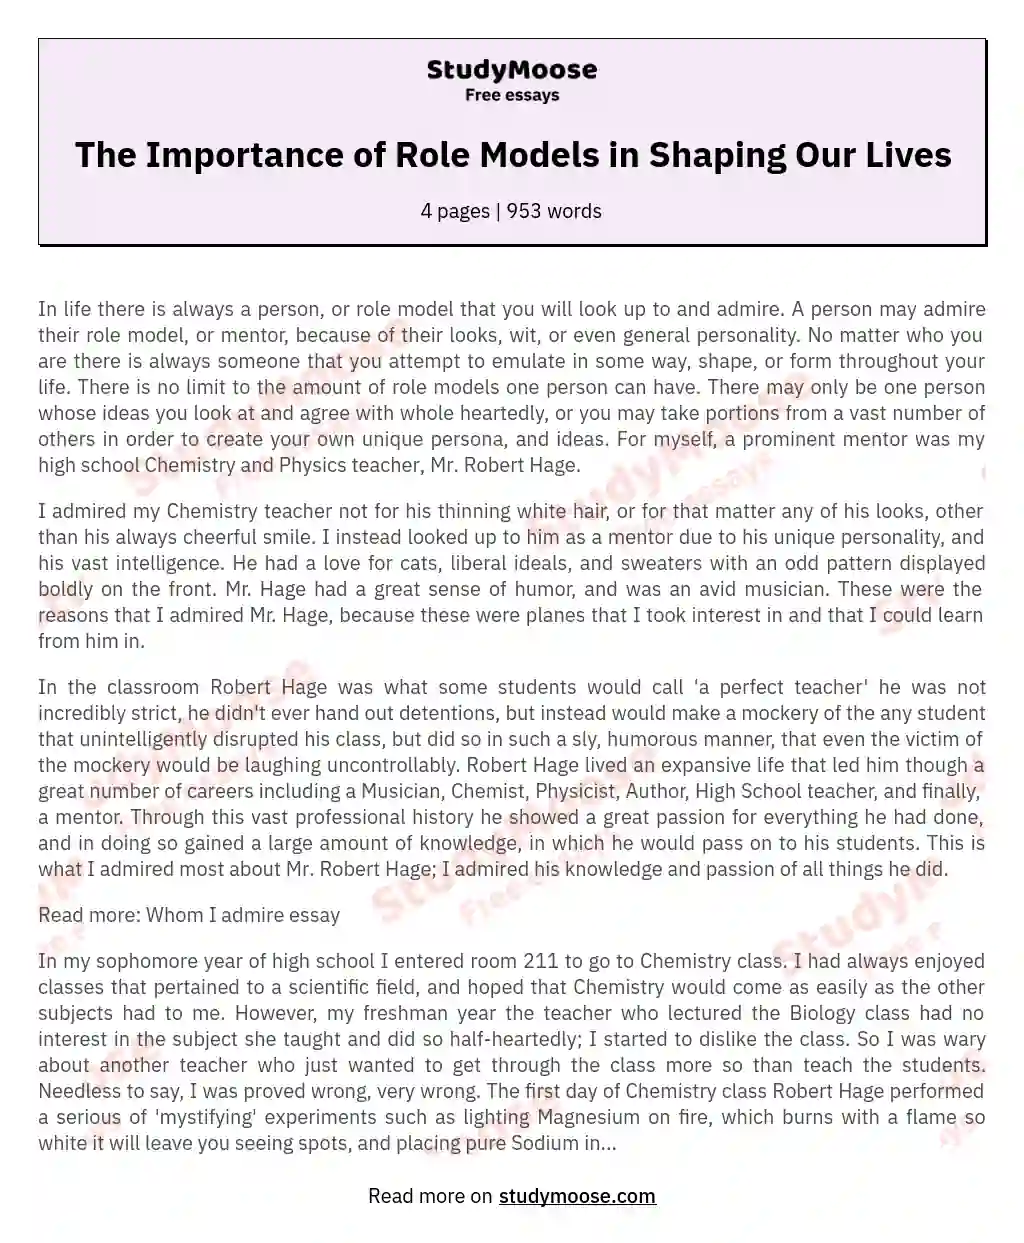 The Importance of Role Models in Shaping Our Lives essay